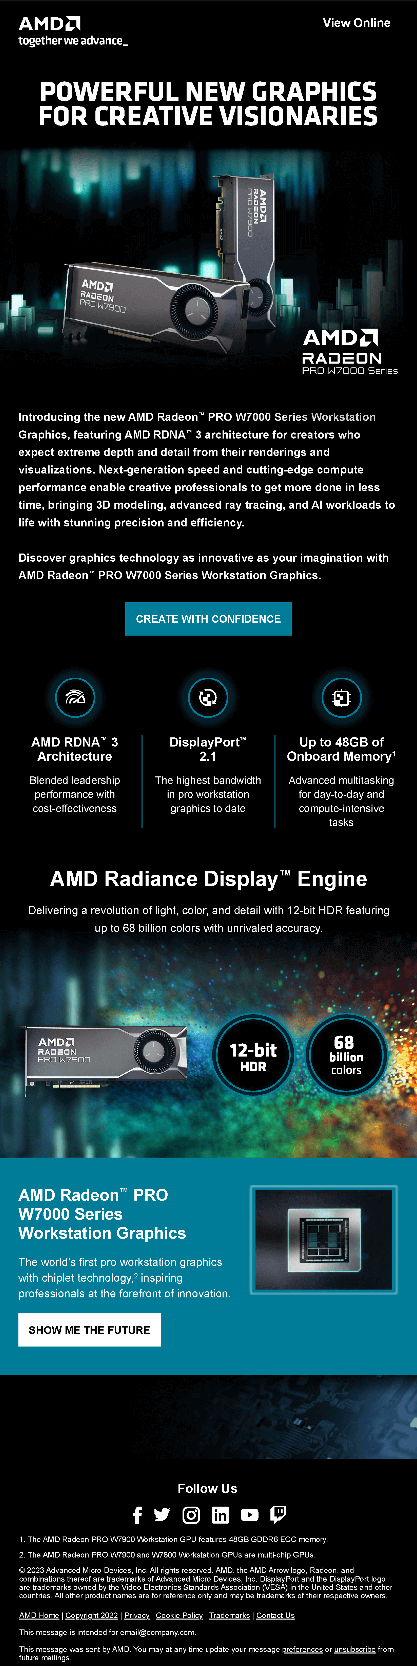 An eblast introducing the advantages of AMD Radeon PRO W7000 Series graphics for creative professionals